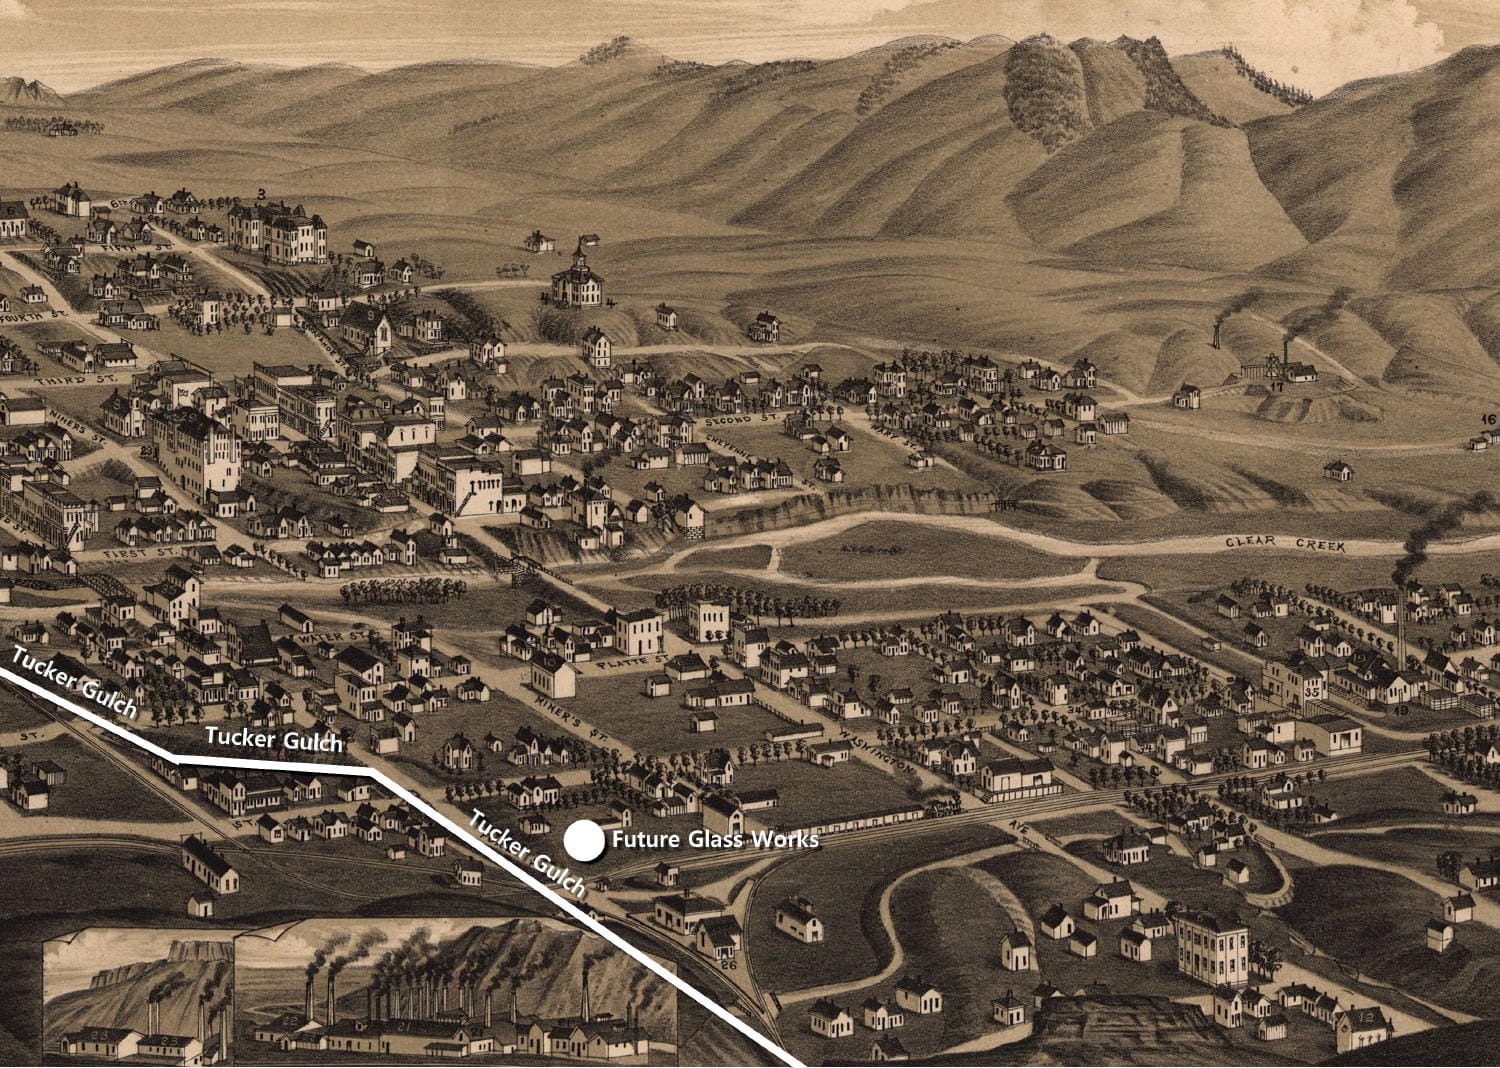 drawing of Golden in 1882 with the path of Tucker Gulch and the future site of the glass works marked